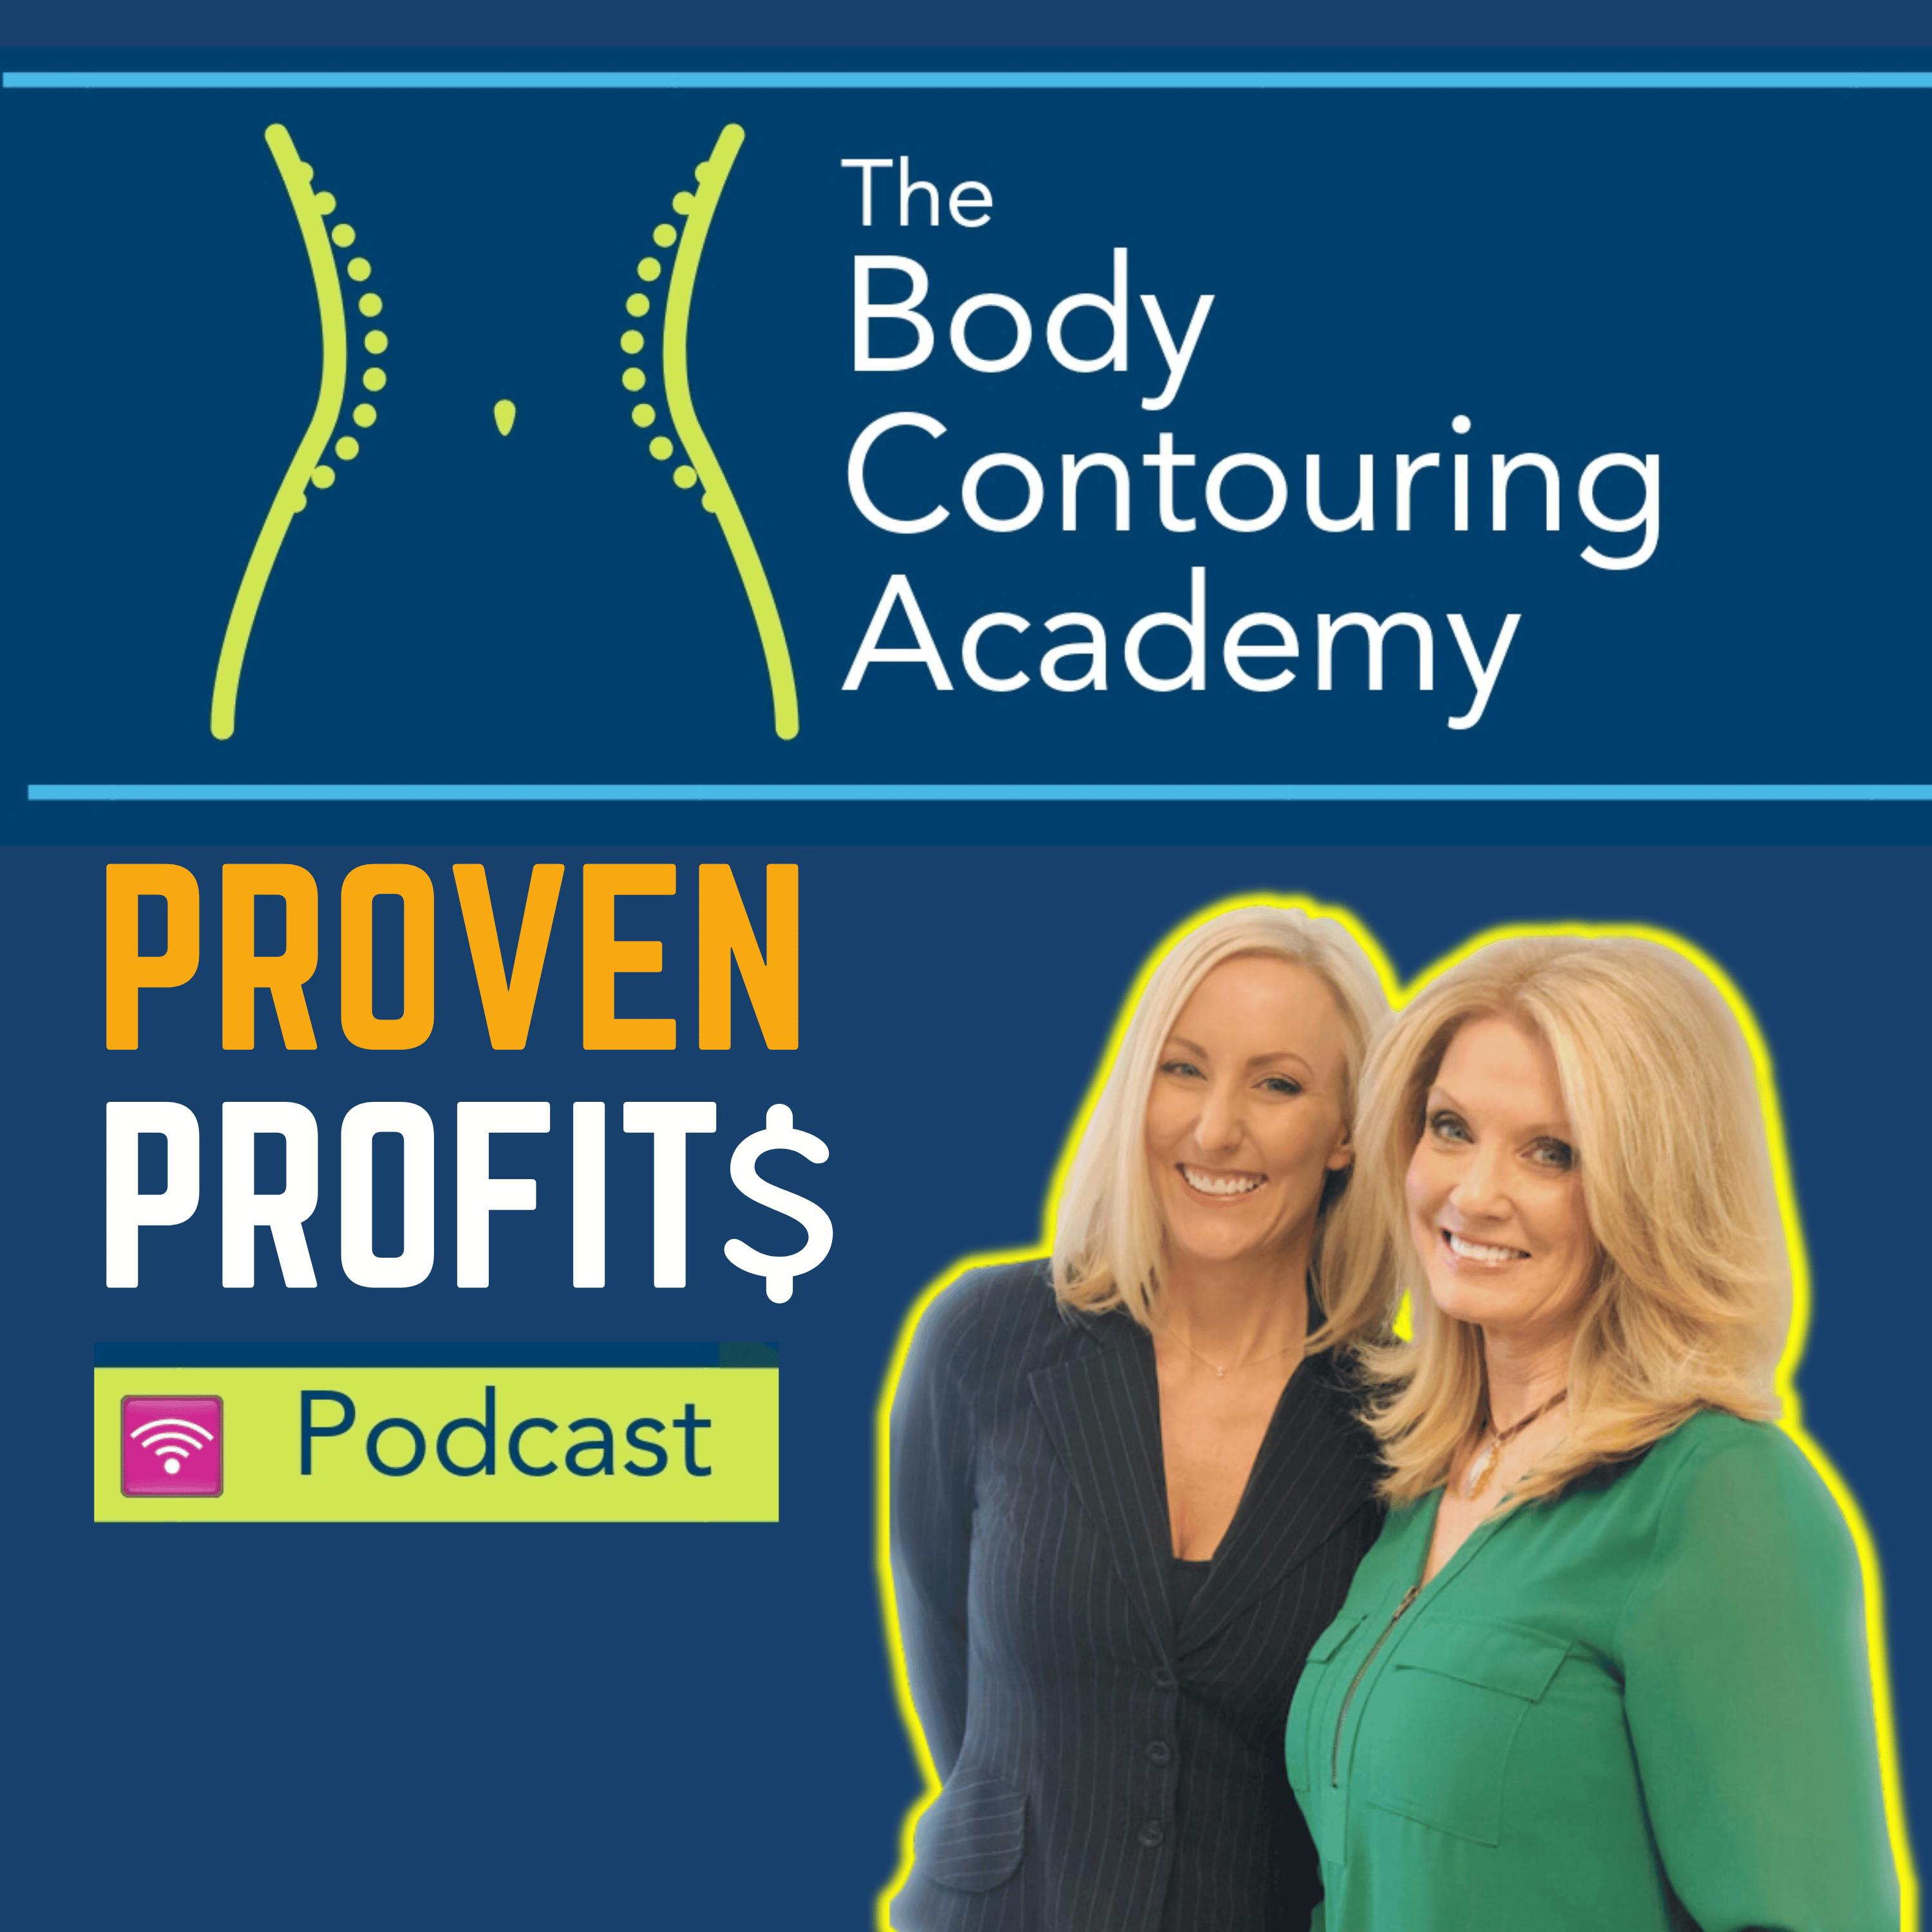 Artwork for podcast Body Contouring Academy's Proven Profits Podcast